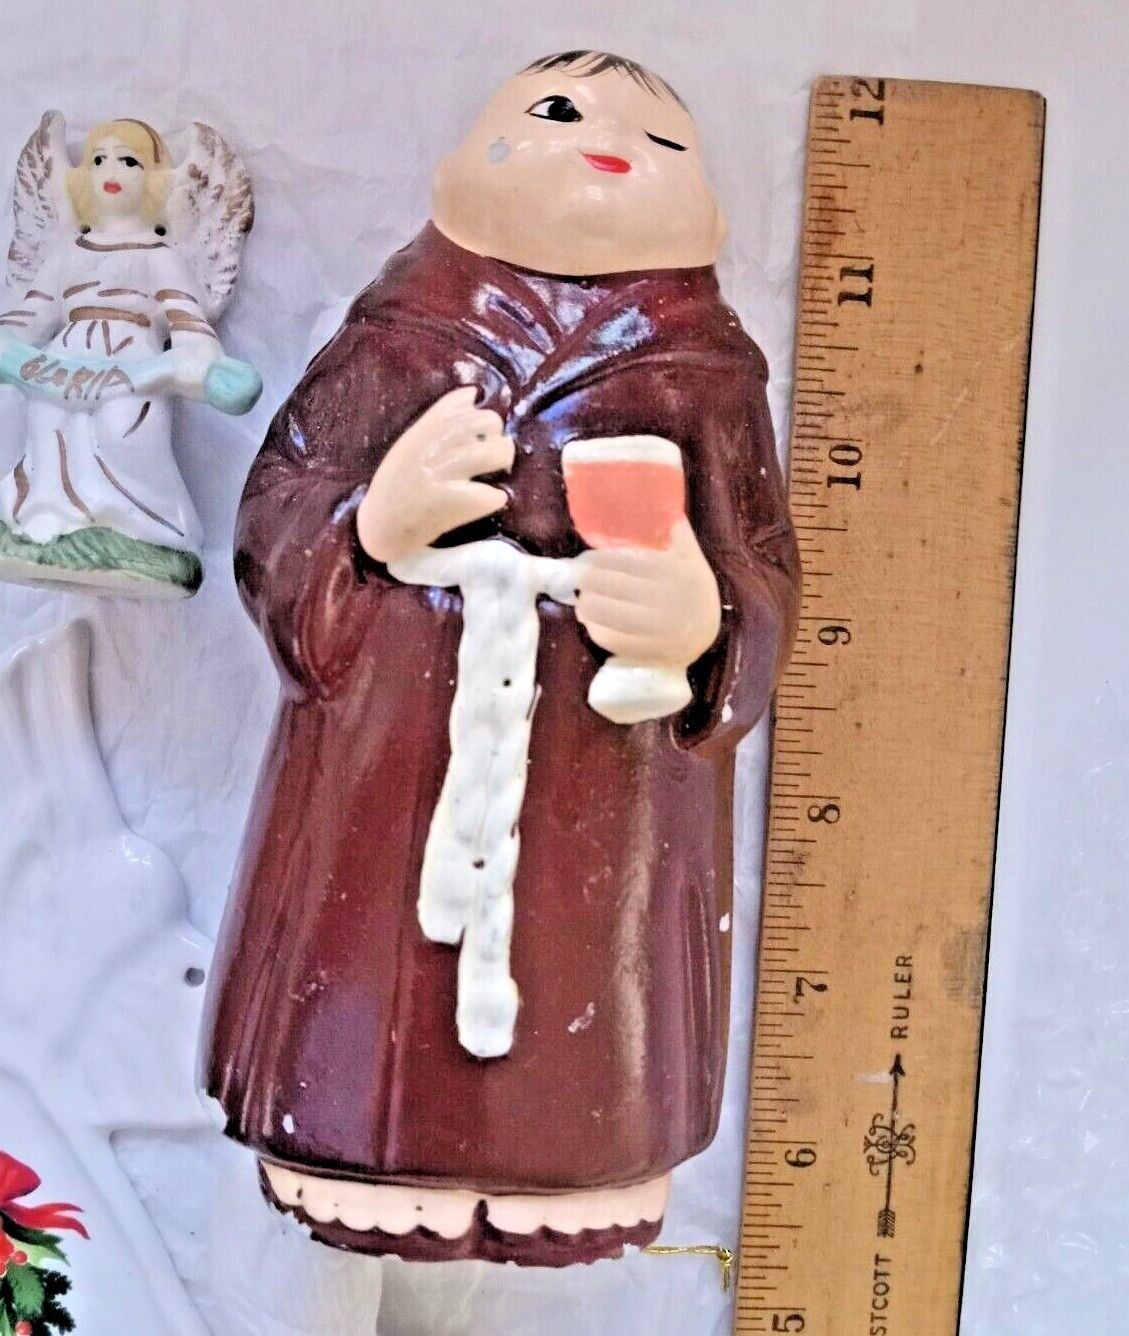 Vintage to New Christmas Decorations, Ornaments, Figurines Mixed